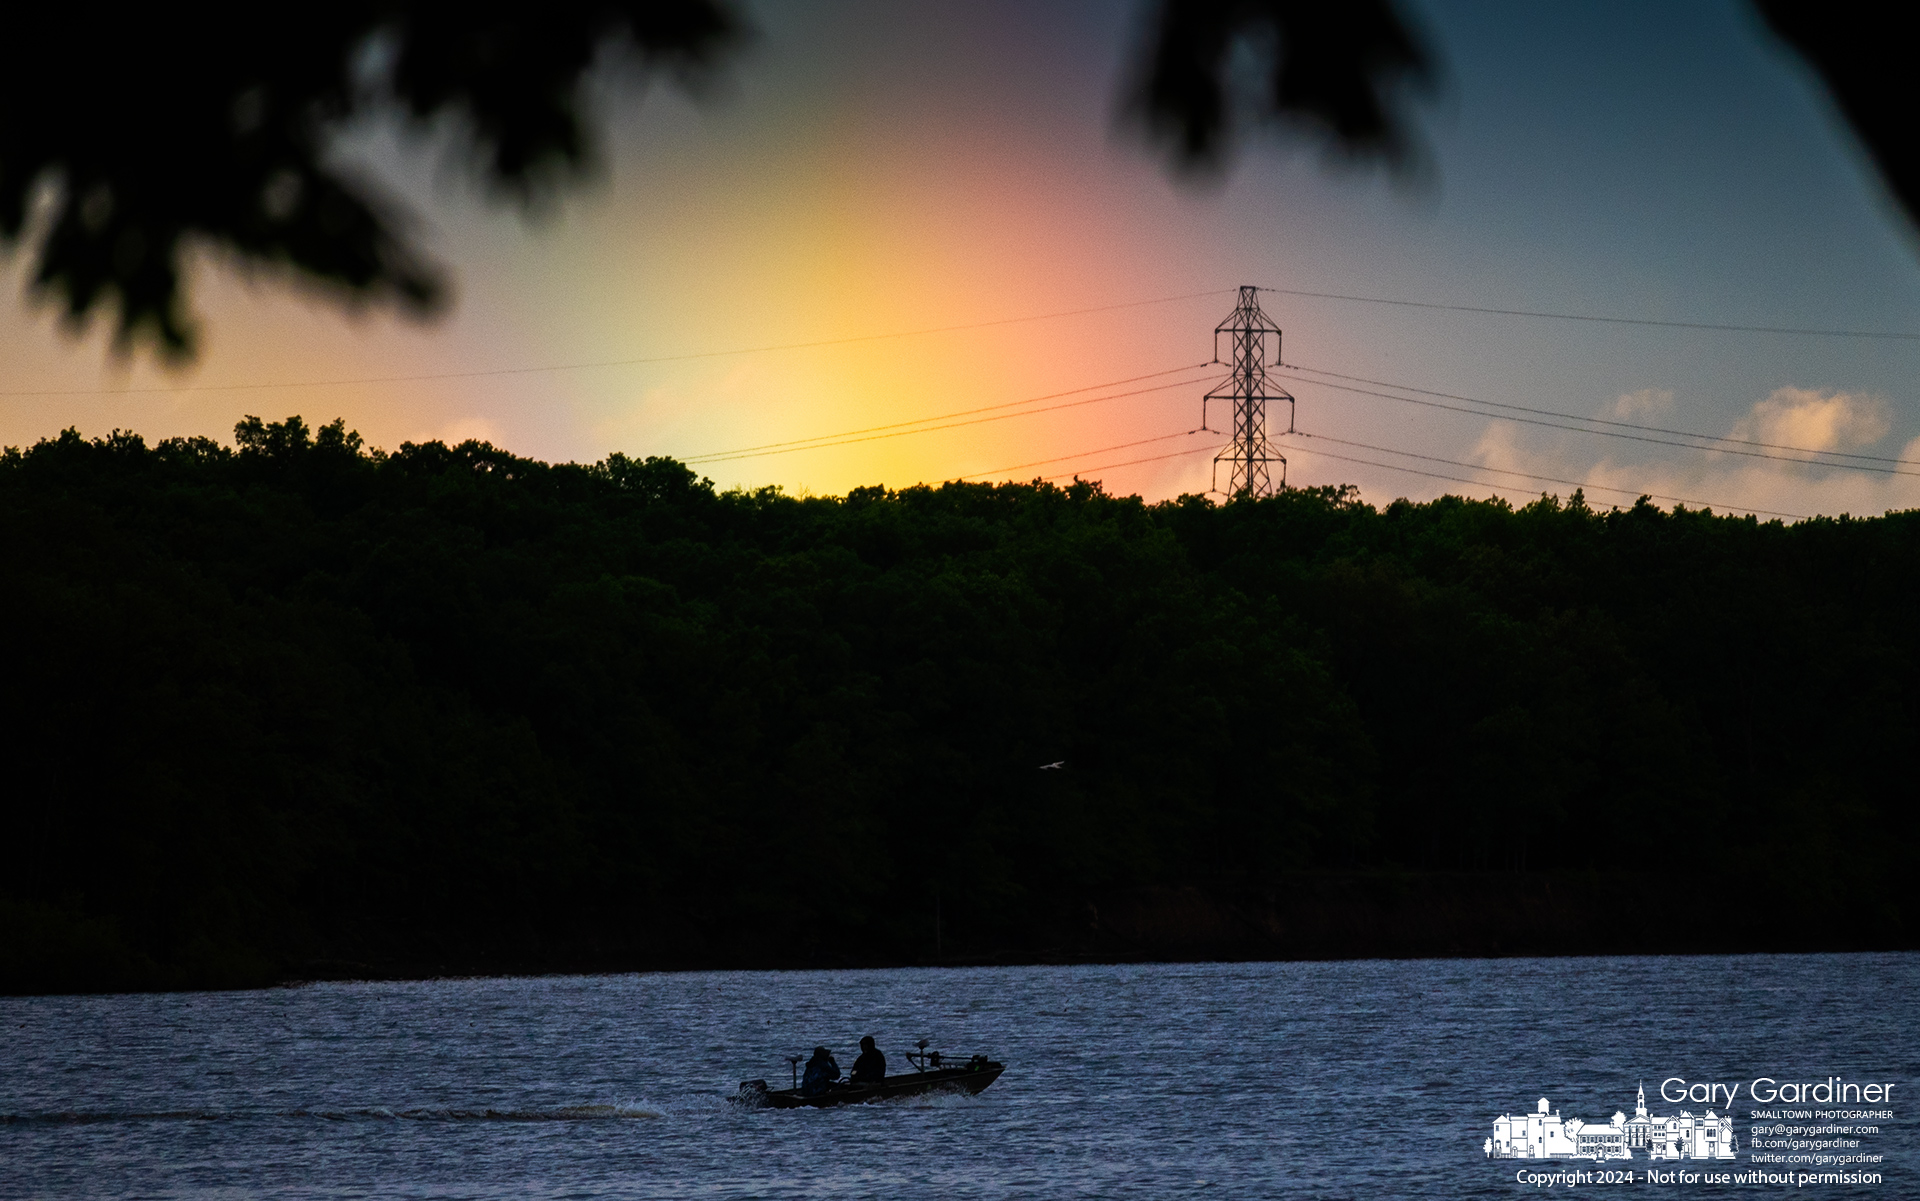 After late afternoon storms, a pair of fishermen return to the docks at Hoover Reservoir under the umbrella of a rainbow in the eastern sky. My Final Photo for May 9, 2024.